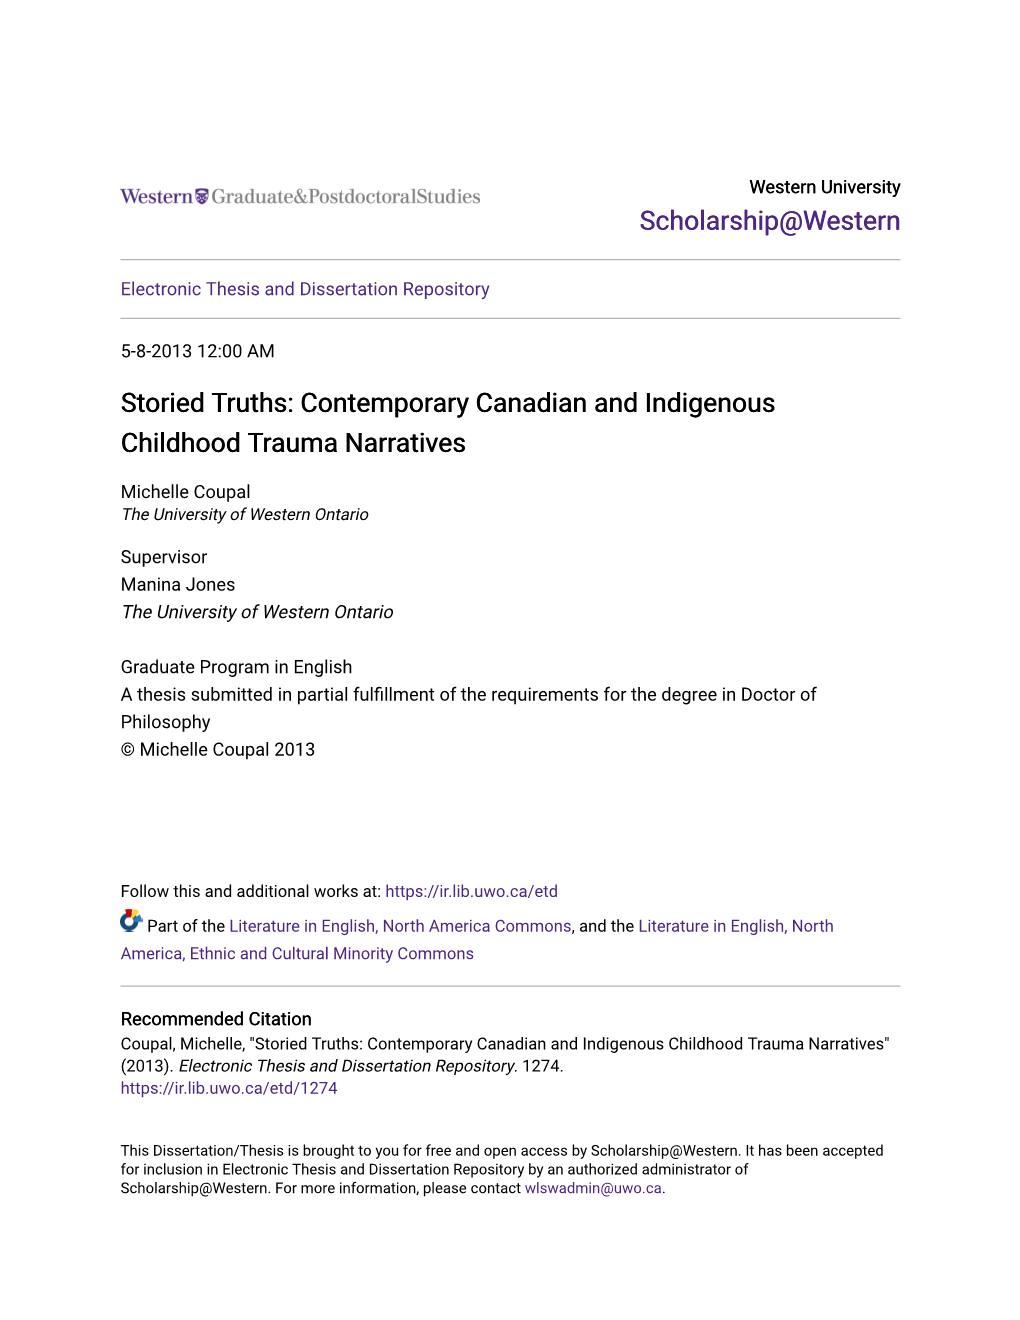 Contemporary Canadian and Indigenous Childhood Trauma Narratives